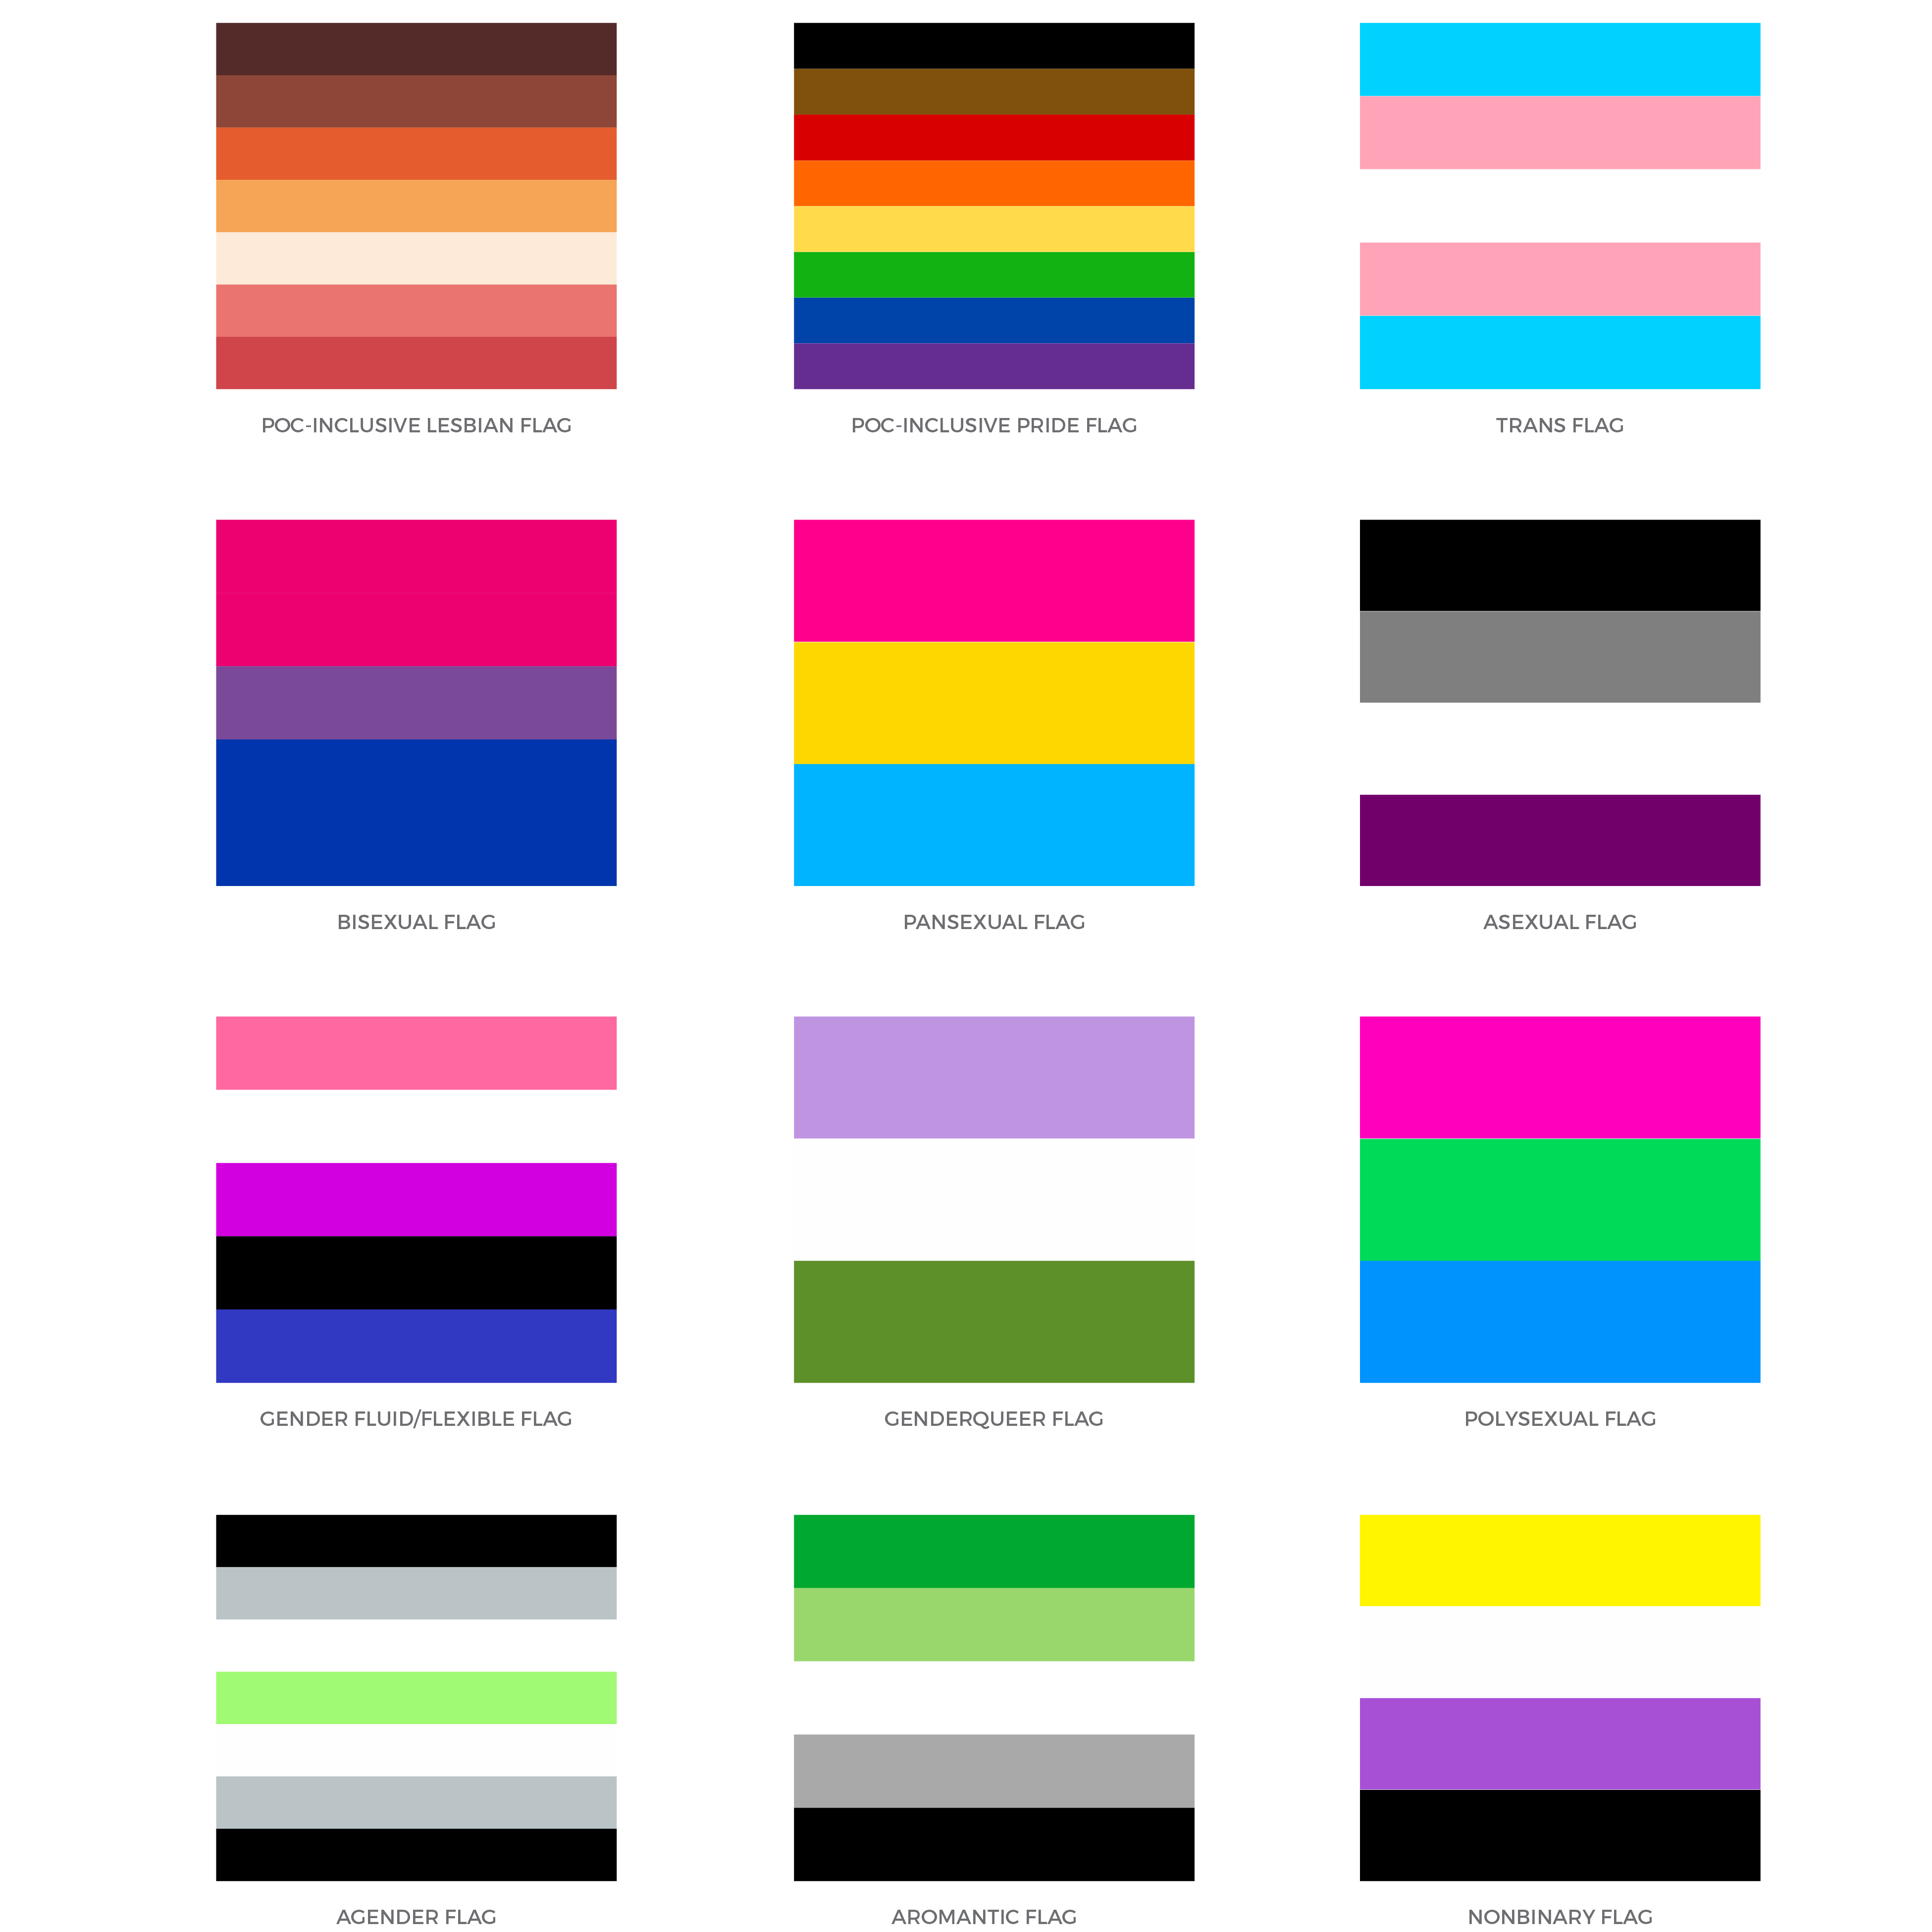 what do the colours stand for in the pride flag